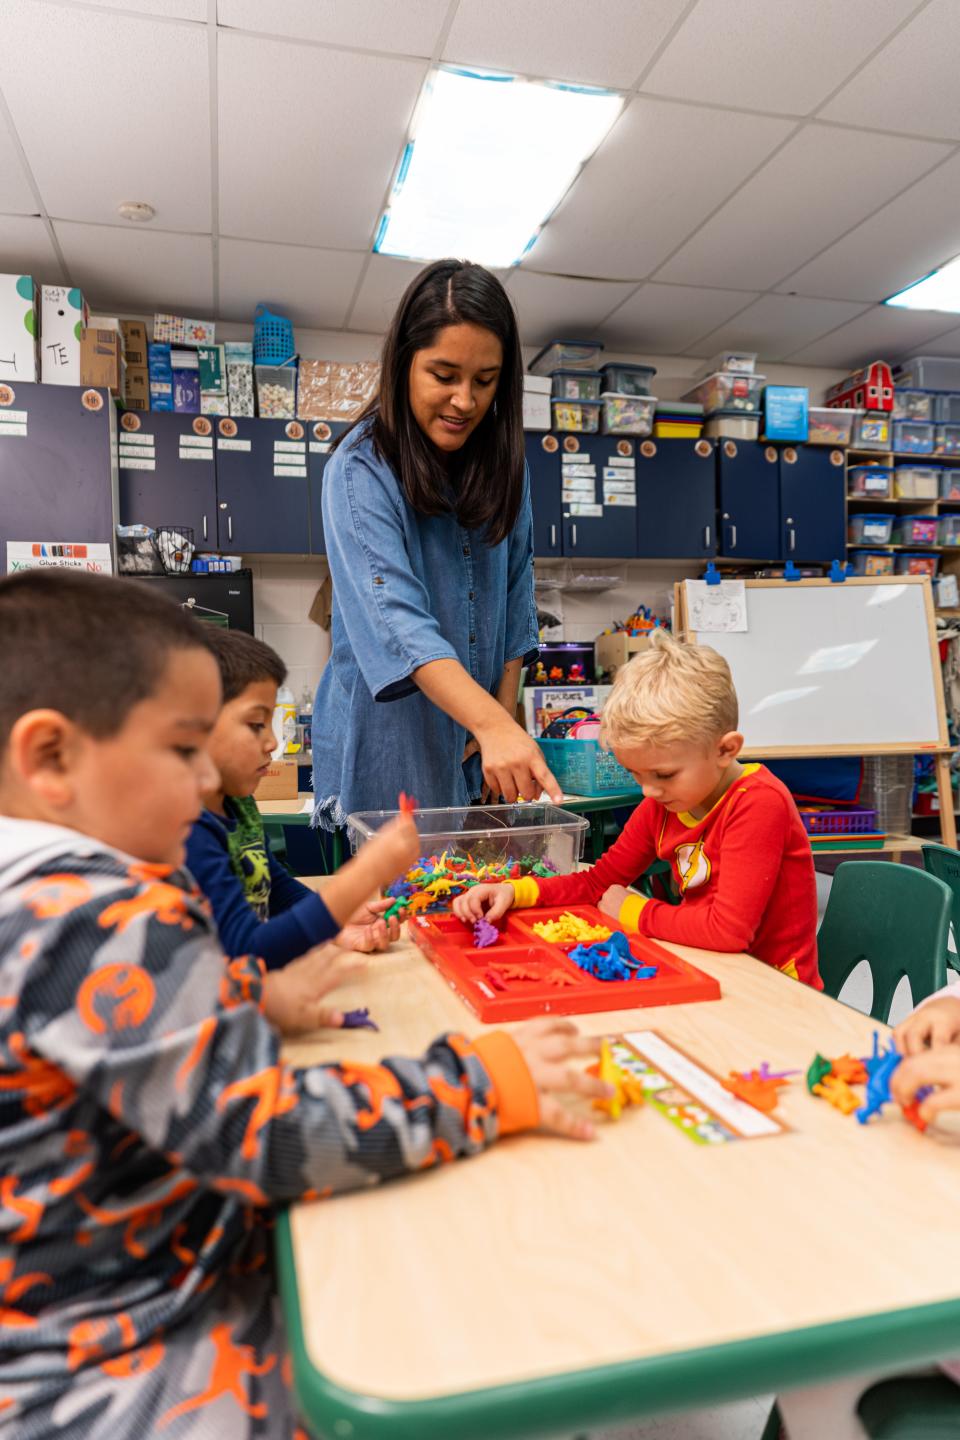 Sarahi Garcia-Acosta, a pre-K teacher at Arthur Elementary School in the Oklahoma City district, directs her students as they use math manipulatives to understand important counting concepts. Through the online platform DonorsChoose, OG&E helped fund Garcia-Acosta's request for these critical classroom materials.